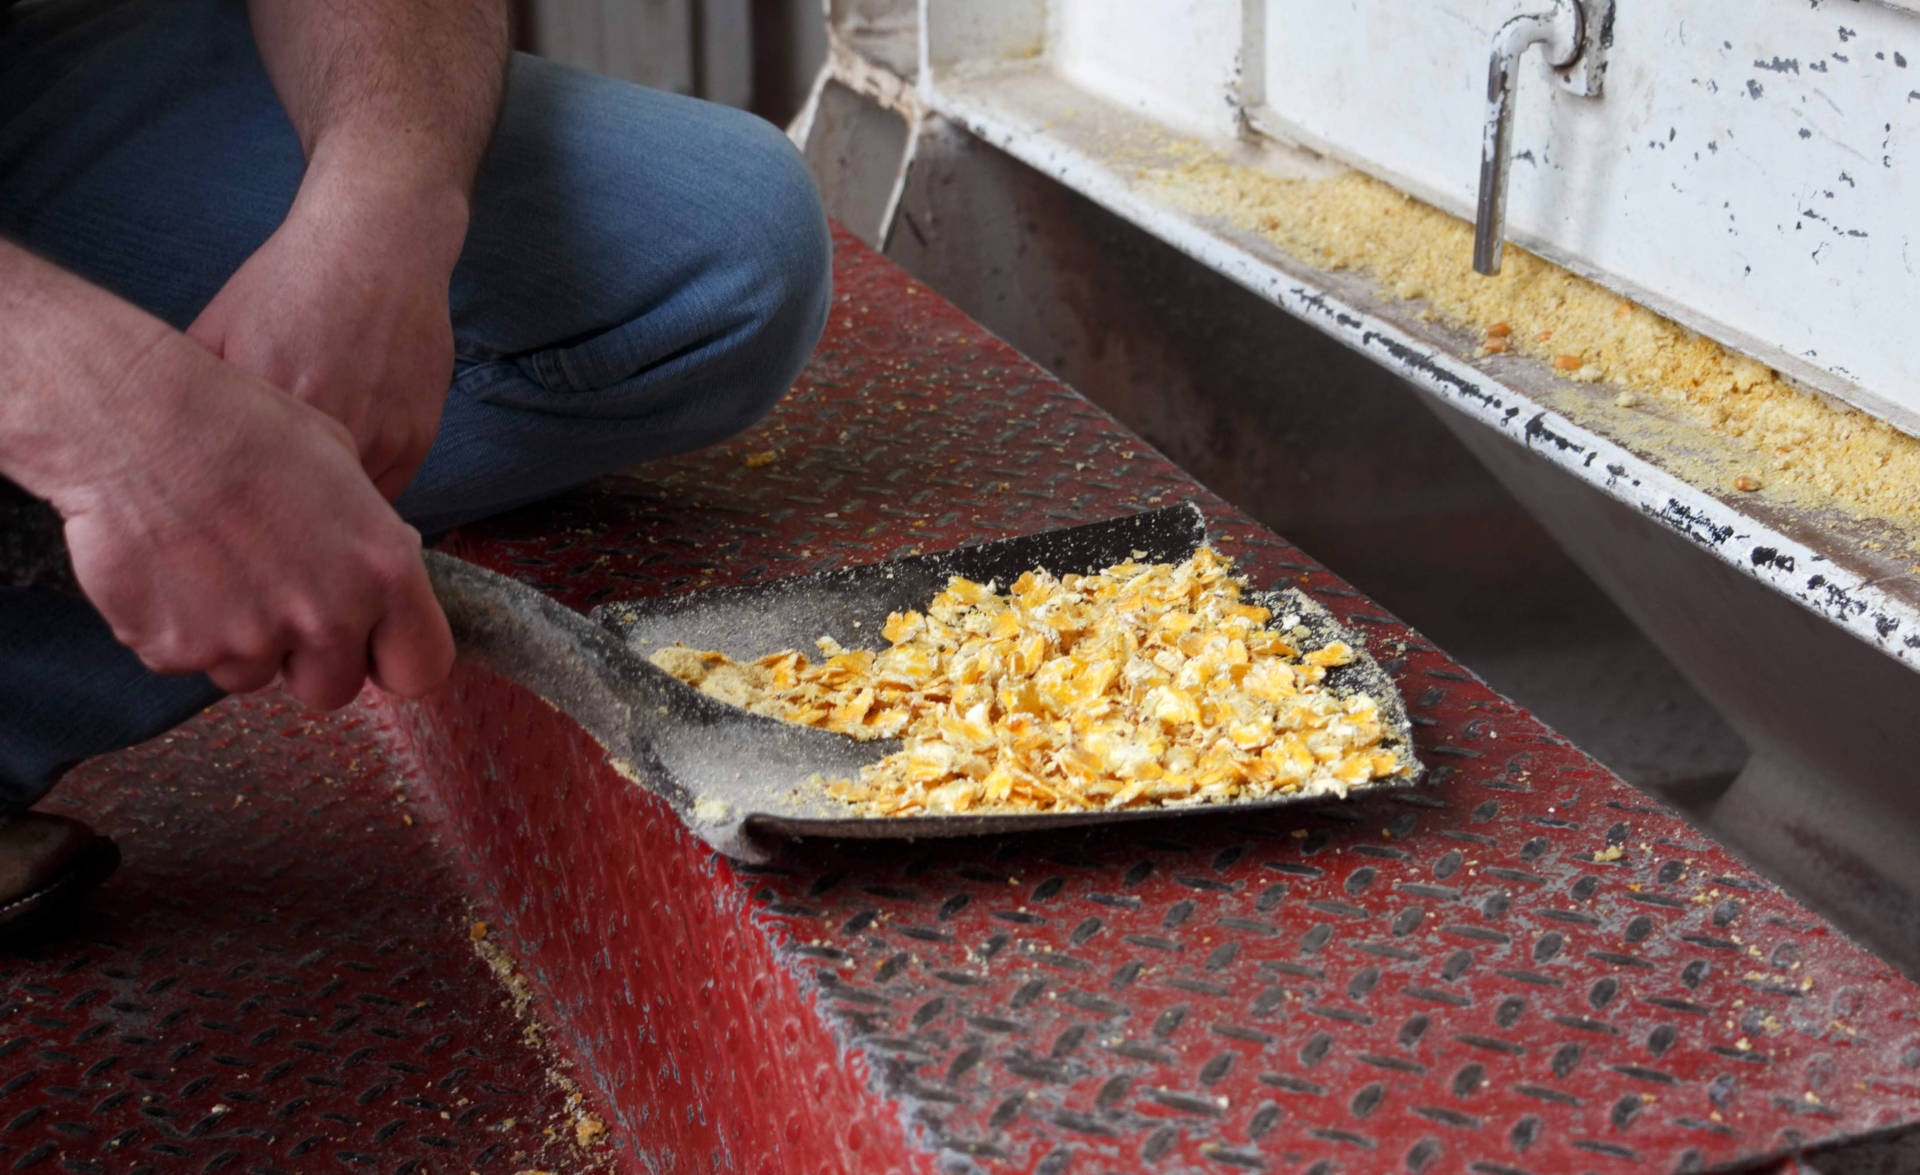 Steamed, flattened corn is fed to cattle to make them gain weight quickly. This diet can also lead to liver abscesses